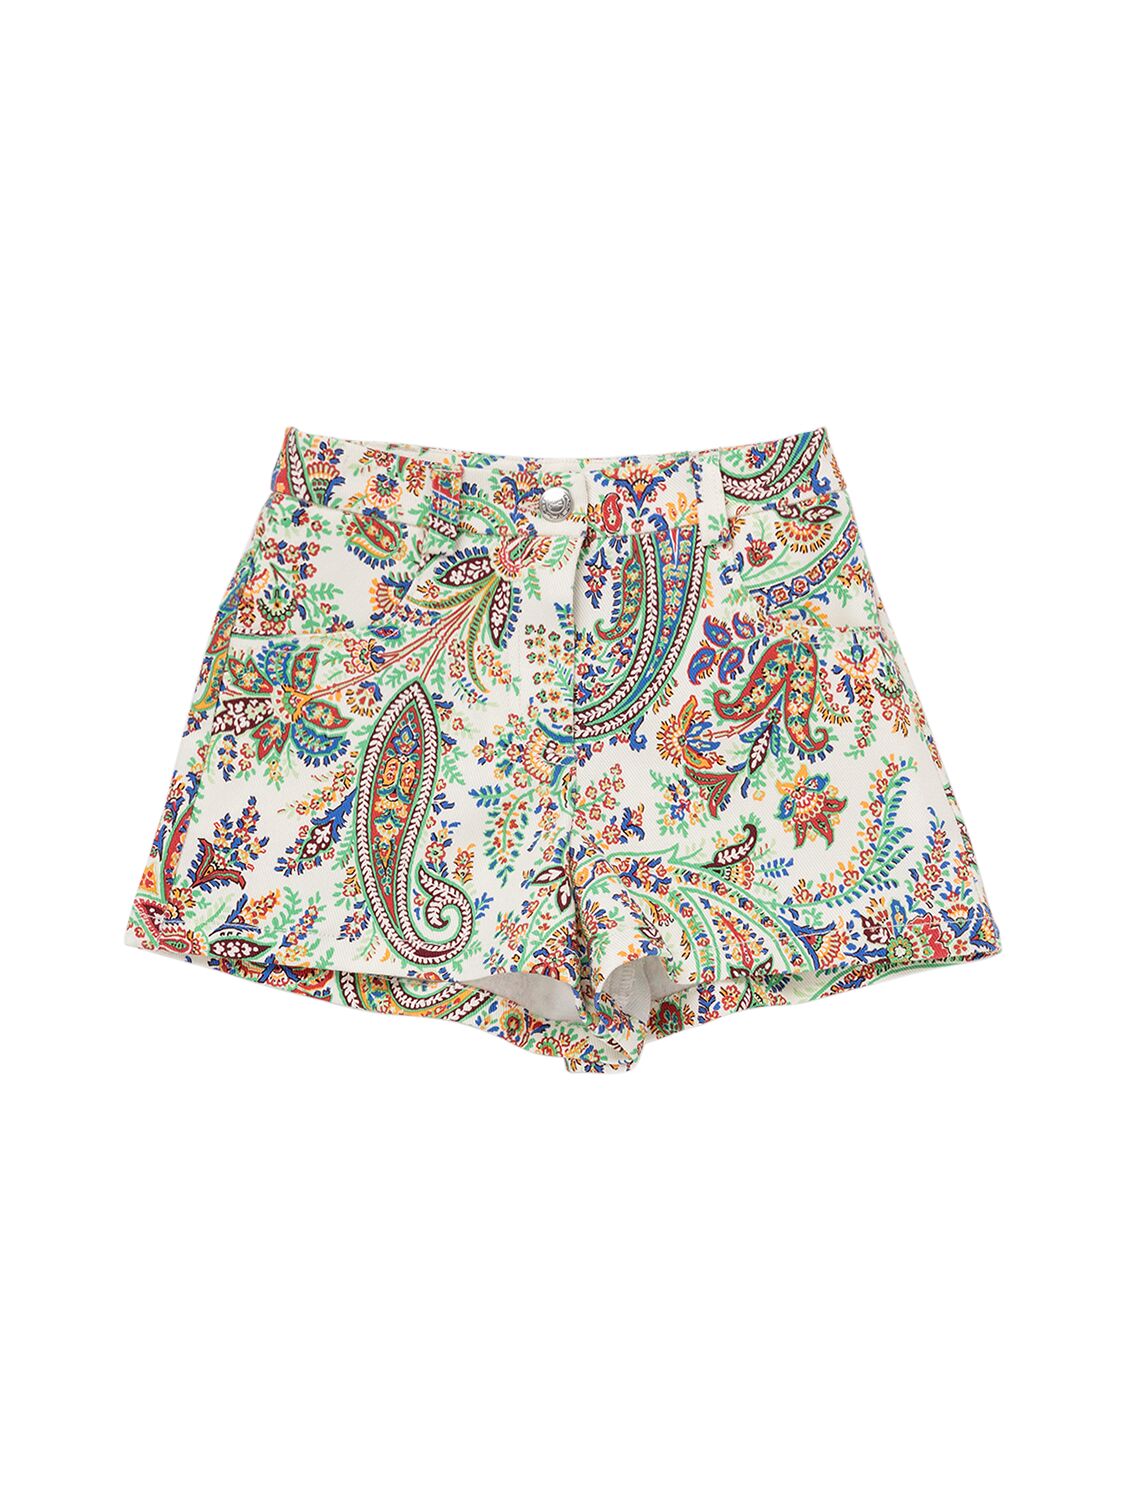 Etro Kids' Printed Stretch Bull Cotton Shorts In Ivory,multi